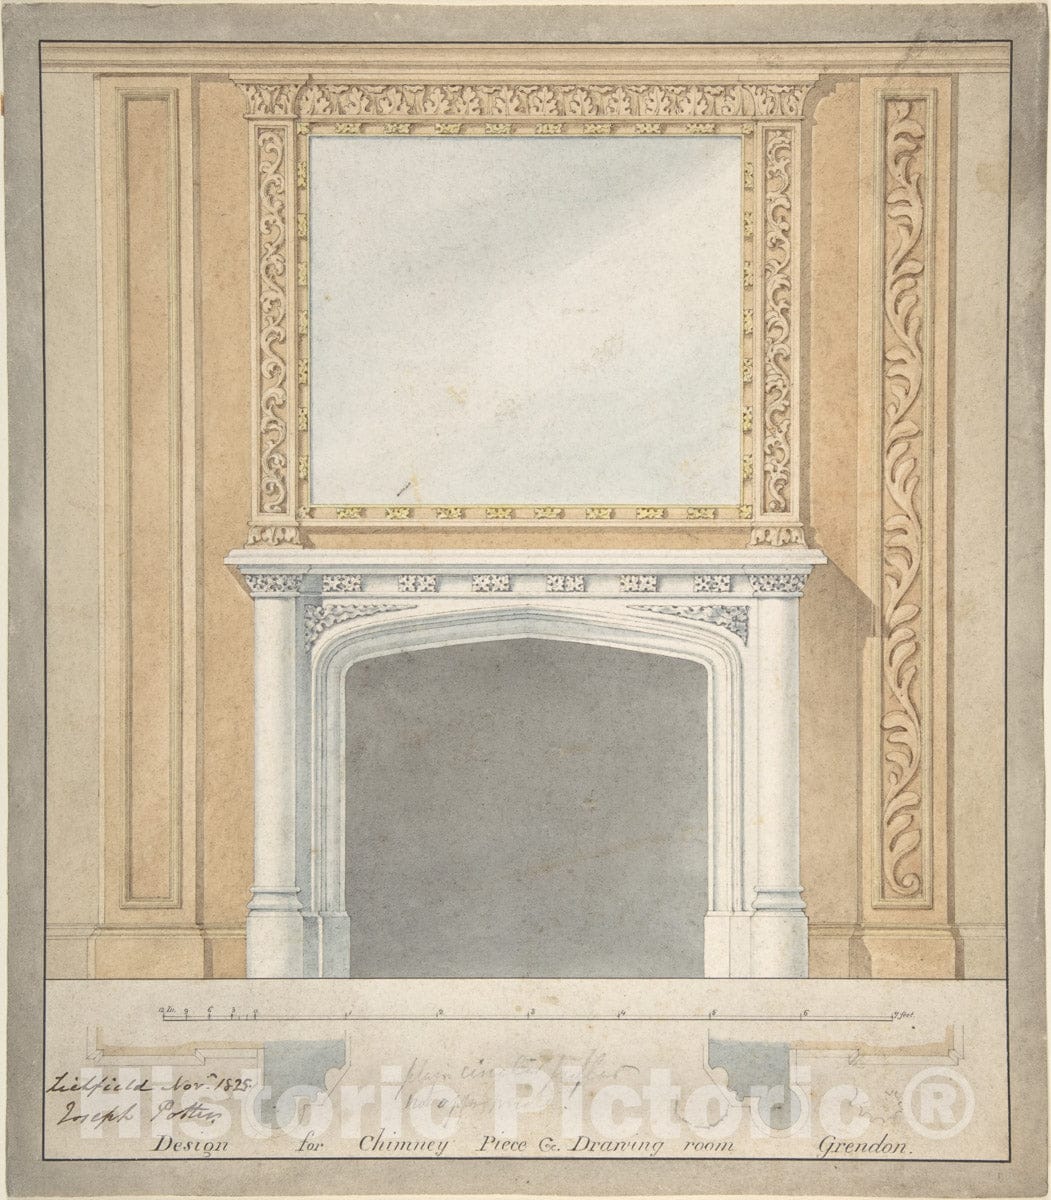 Art Print : Joseph Potter - Design for a Chimney Piece in a Jacobethan Style, for The Drawingroom at Grendon Hall, Warwickshire : Vintage Wall Art